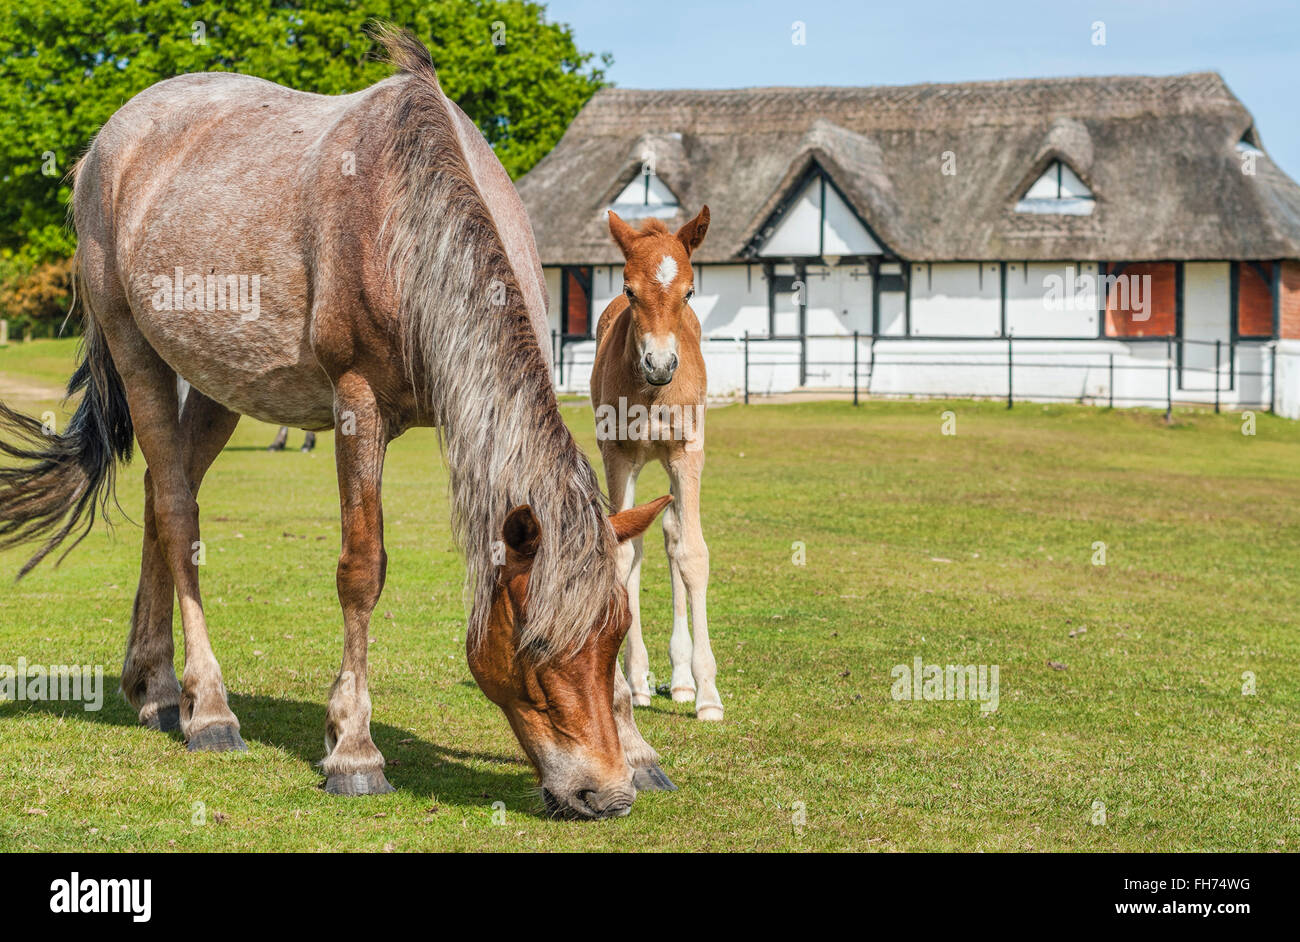 Half Wild New Forest Pony Mare with her foal at the New Forest Wildlife Park near Lyndhurst, South East England Stock Photo